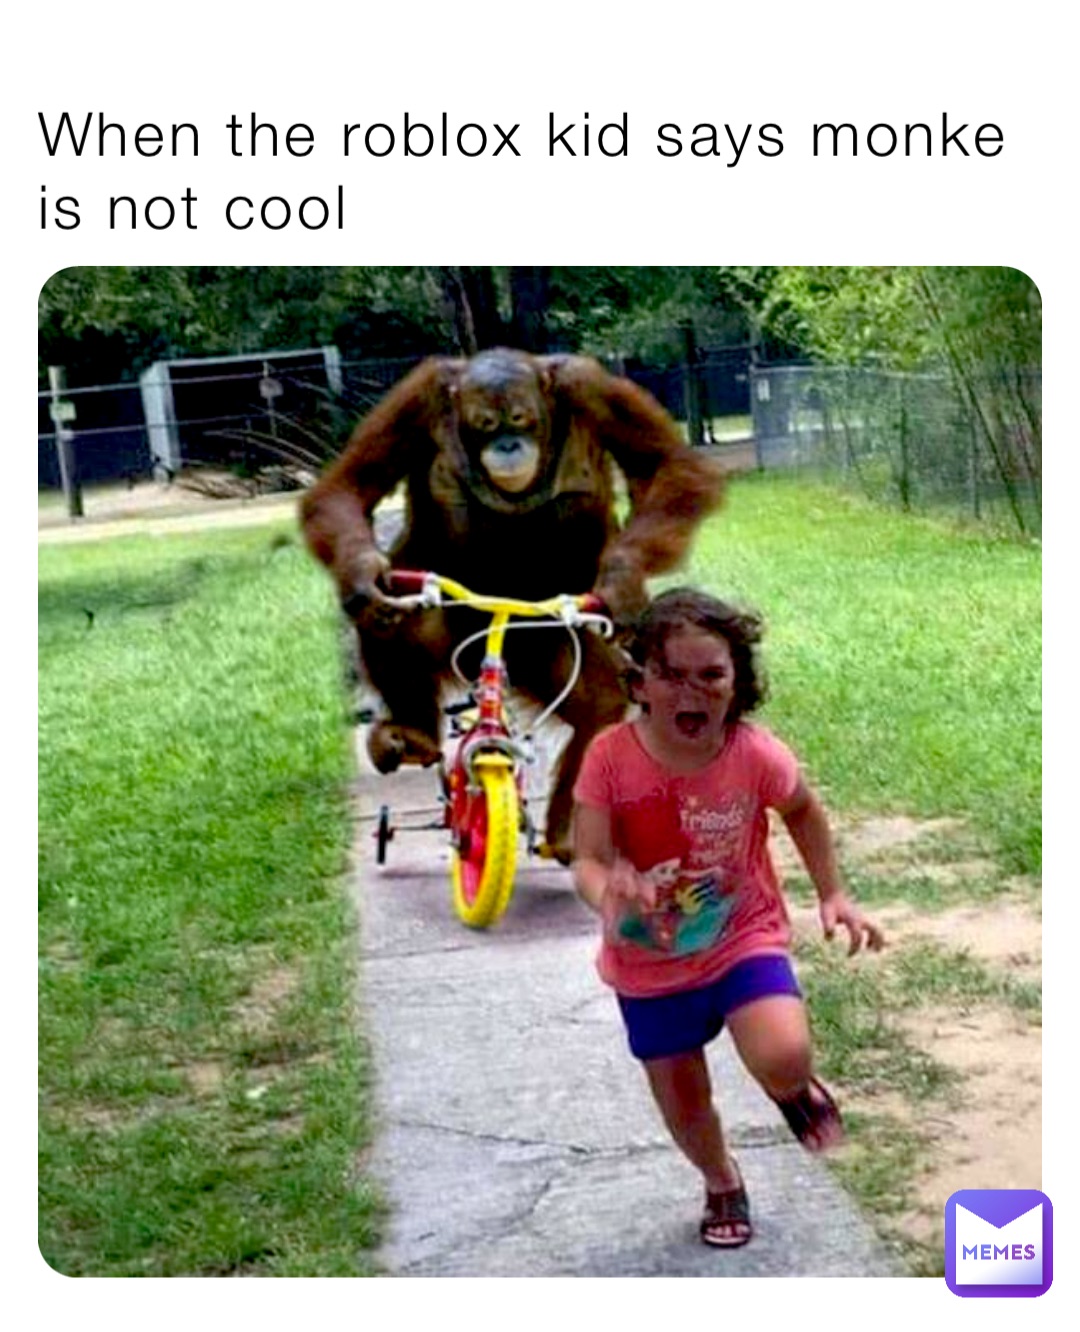 When the roblox kid says monke is not cool